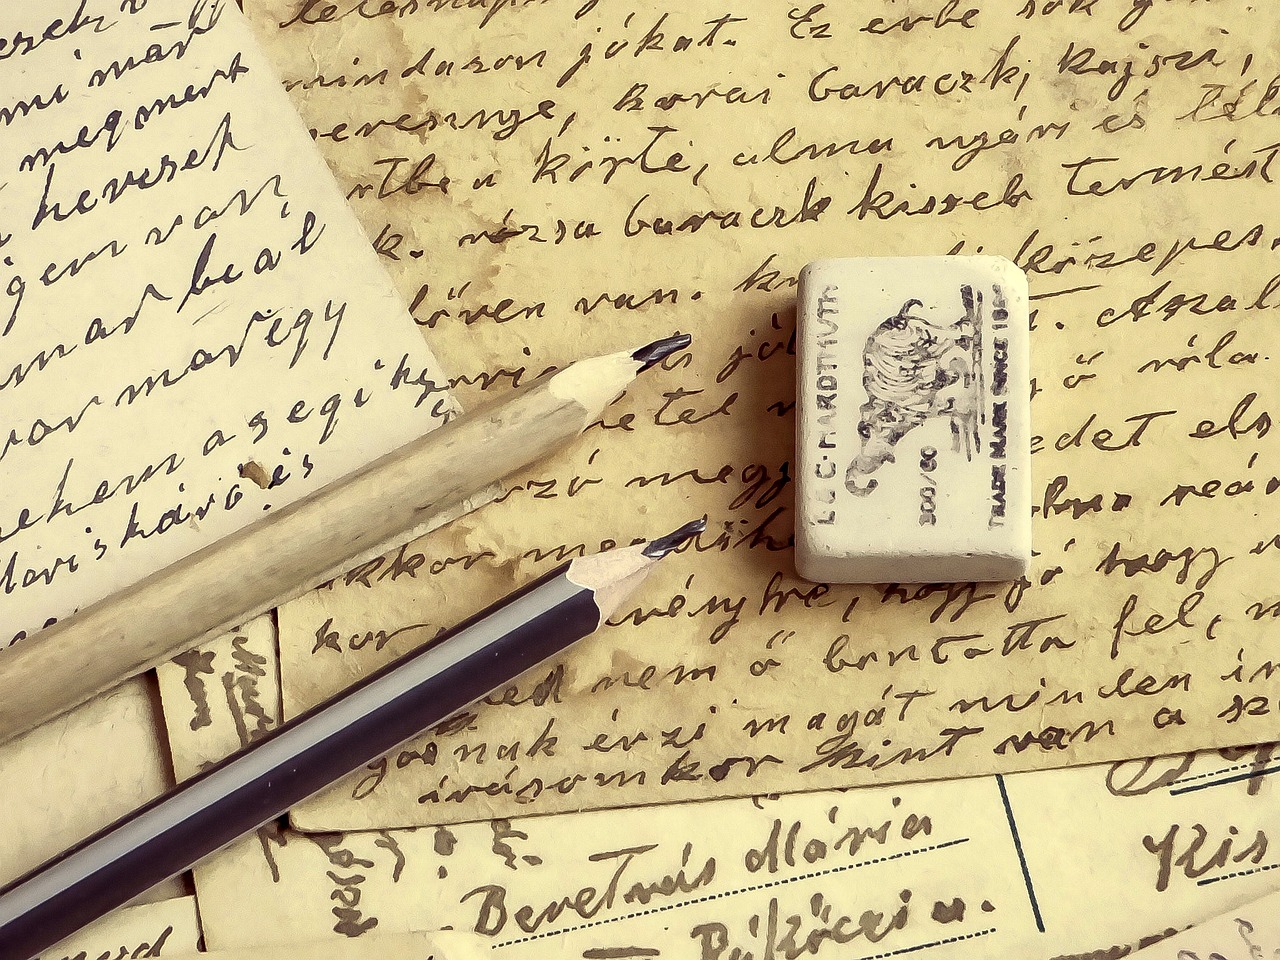 a couple of pencils sitting on top of a piece of paper, inspired by Władysław Podkowiński, old manuscript, writing a letter, vintage theme, header text”